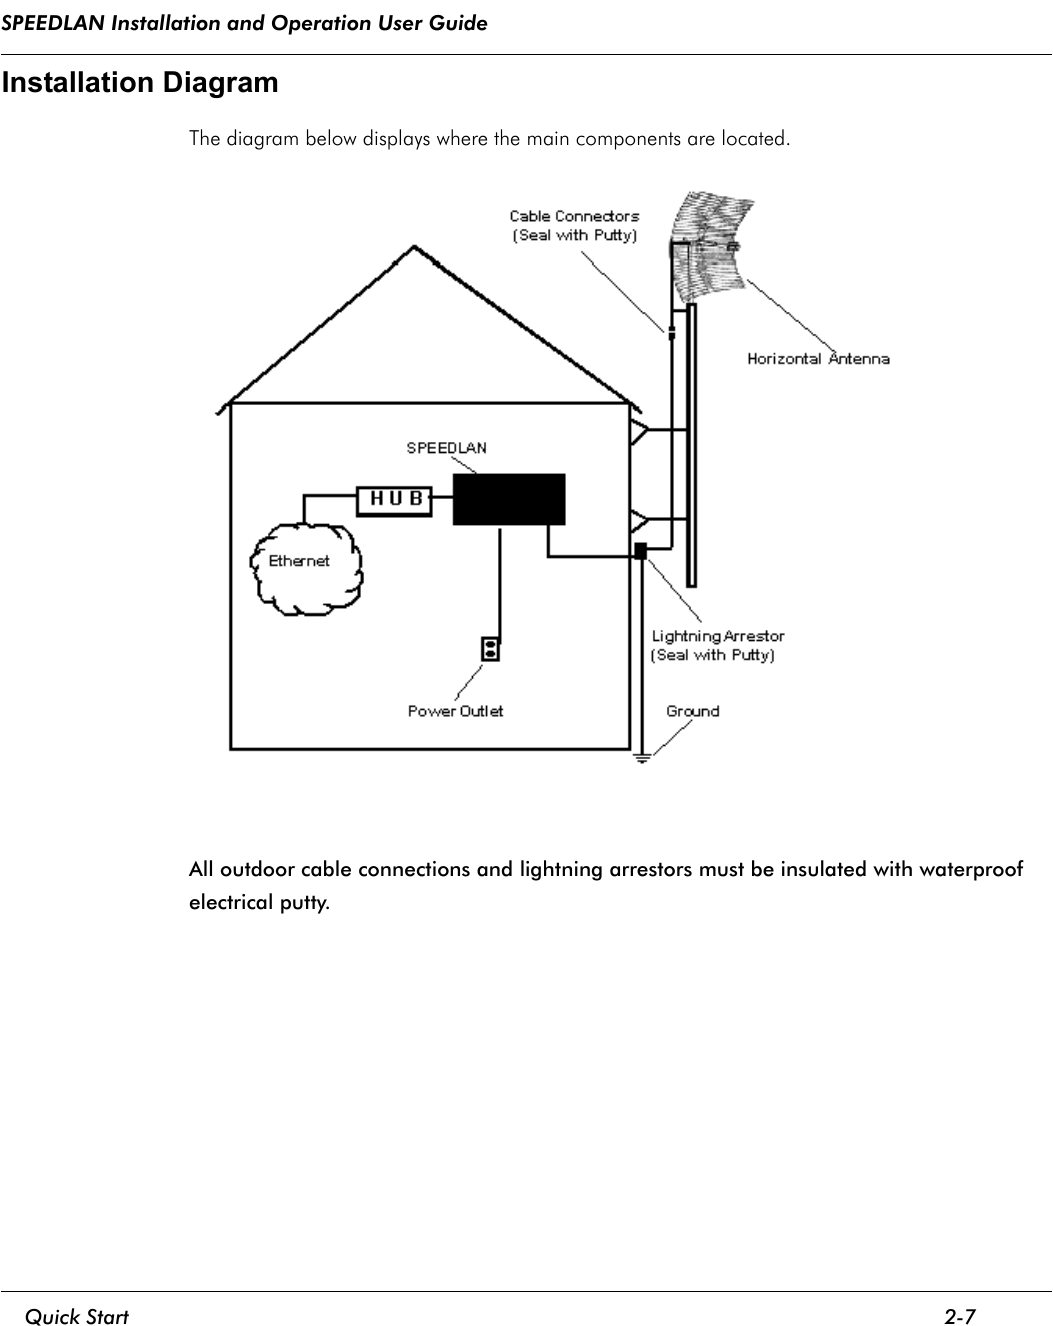 SPEEDLAN Installation and Operation User Guide     Quick Start 2-7                                                                                                                                                              Installation DiagramThe diagram below displays where the main components are located. All outdoor cable connections and lightning arrestors must be insulated with waterproof electrical putty.                